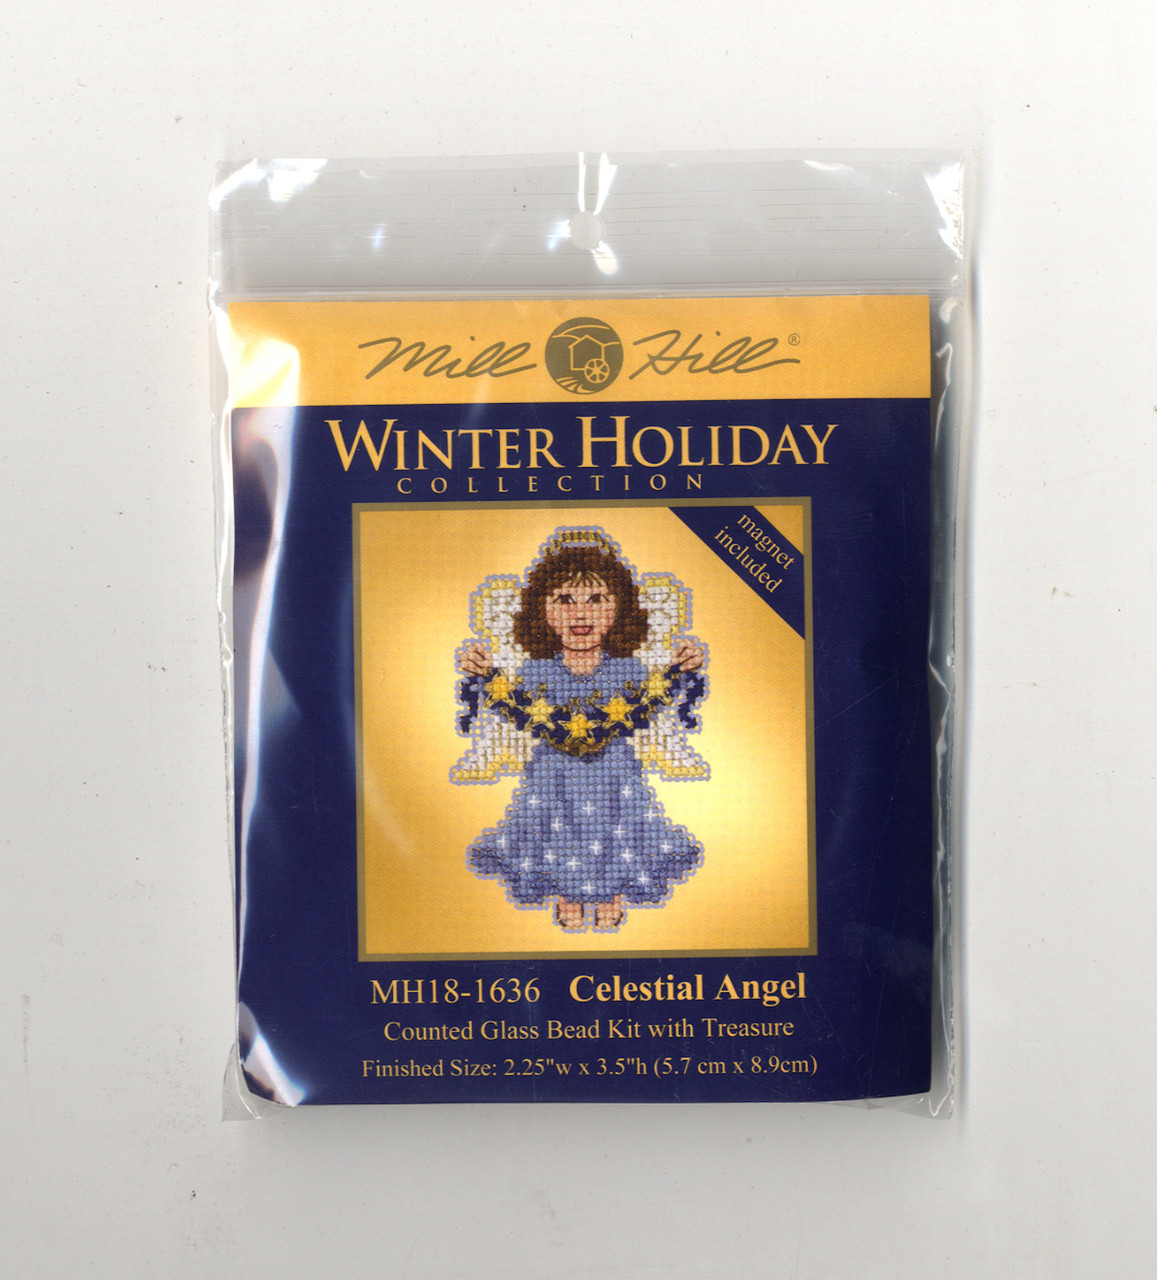 2019 Mill Hill Winter Holiday Collection Ornament Set (6 Kits)